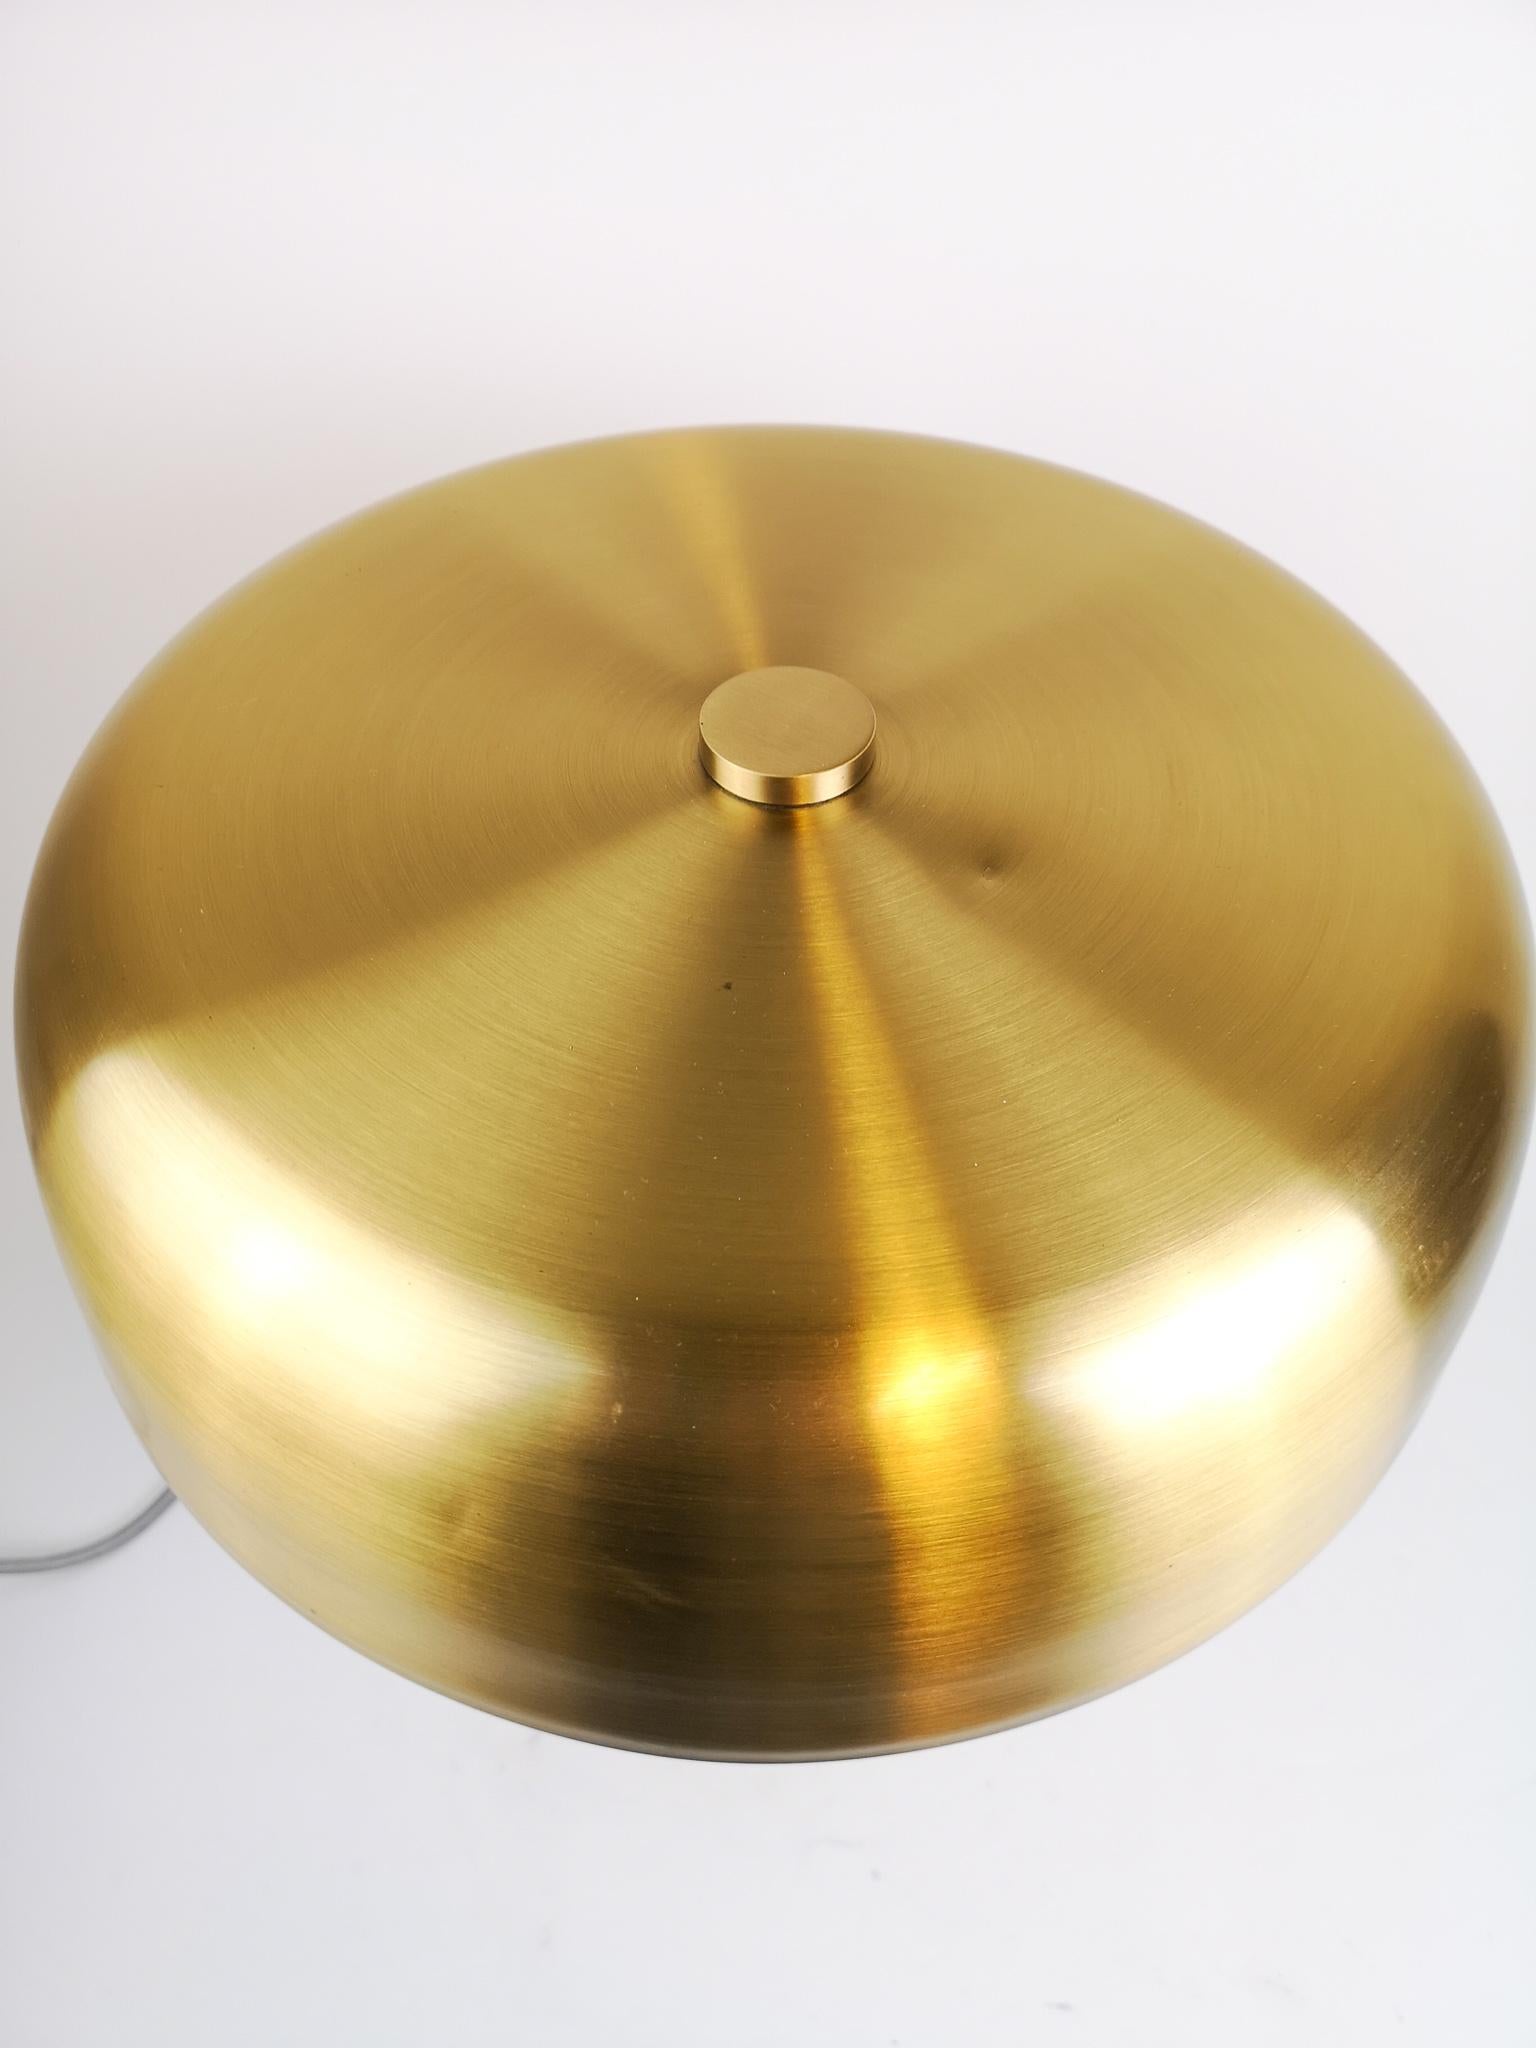 Scandinavian Modern Swedish Midcentury Table Lamp in Brass and Leather by Boréns